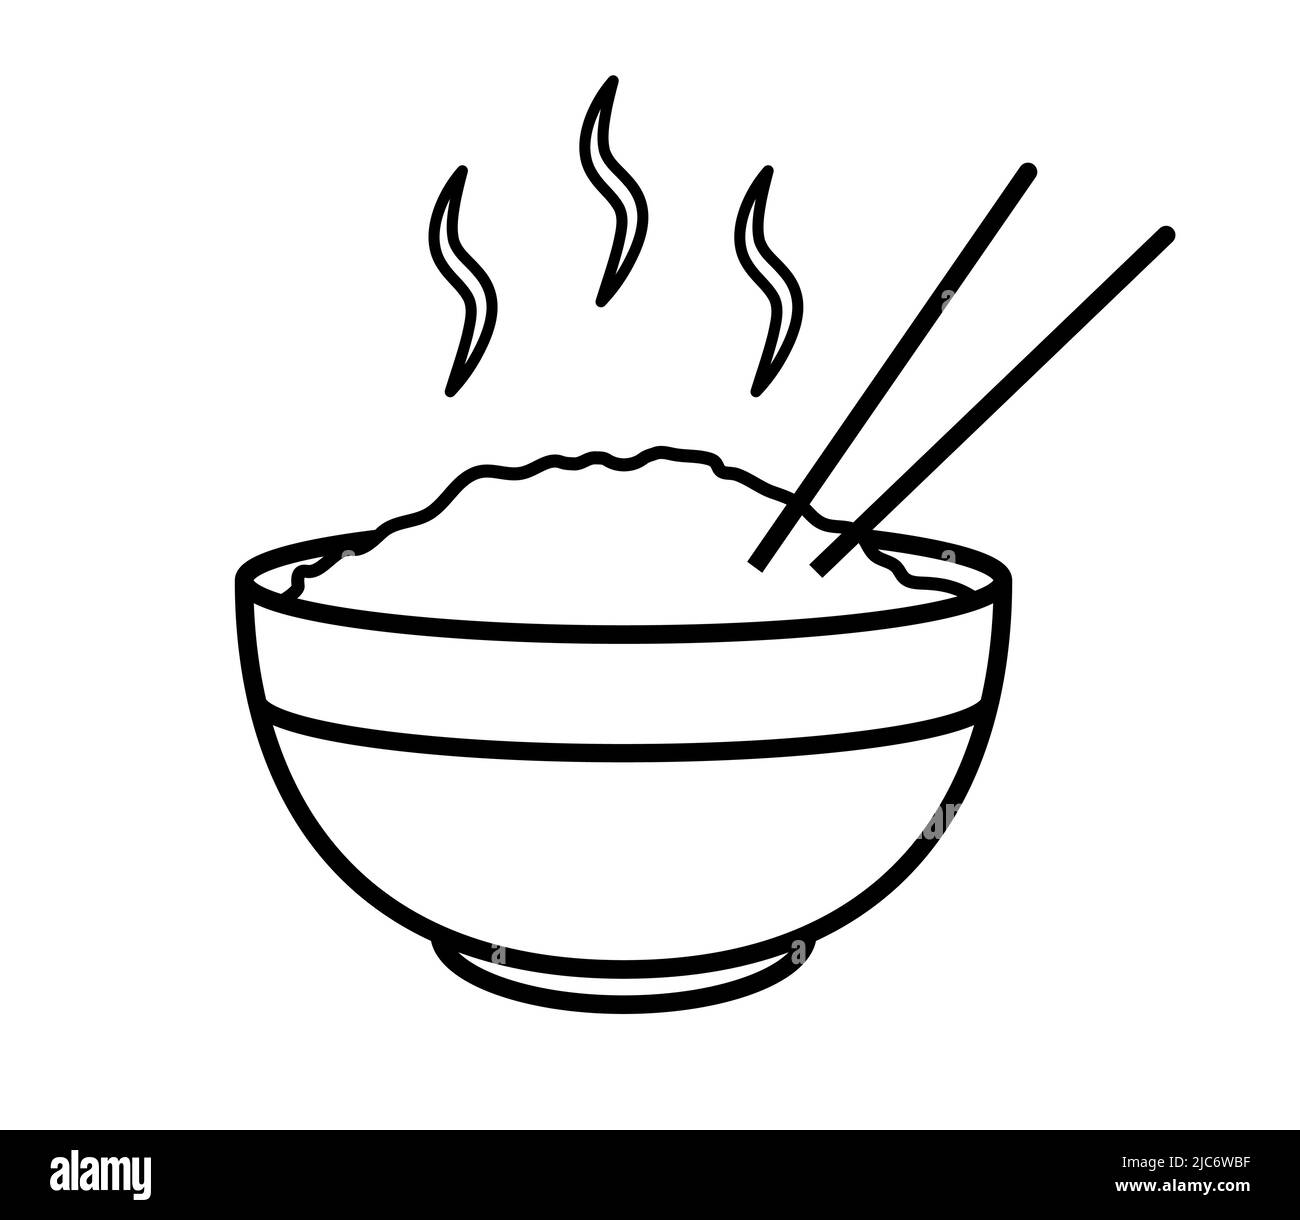 Full rice bowl or food bowl with sticks asian restaurant symbol vector illustration icon Stock Vector